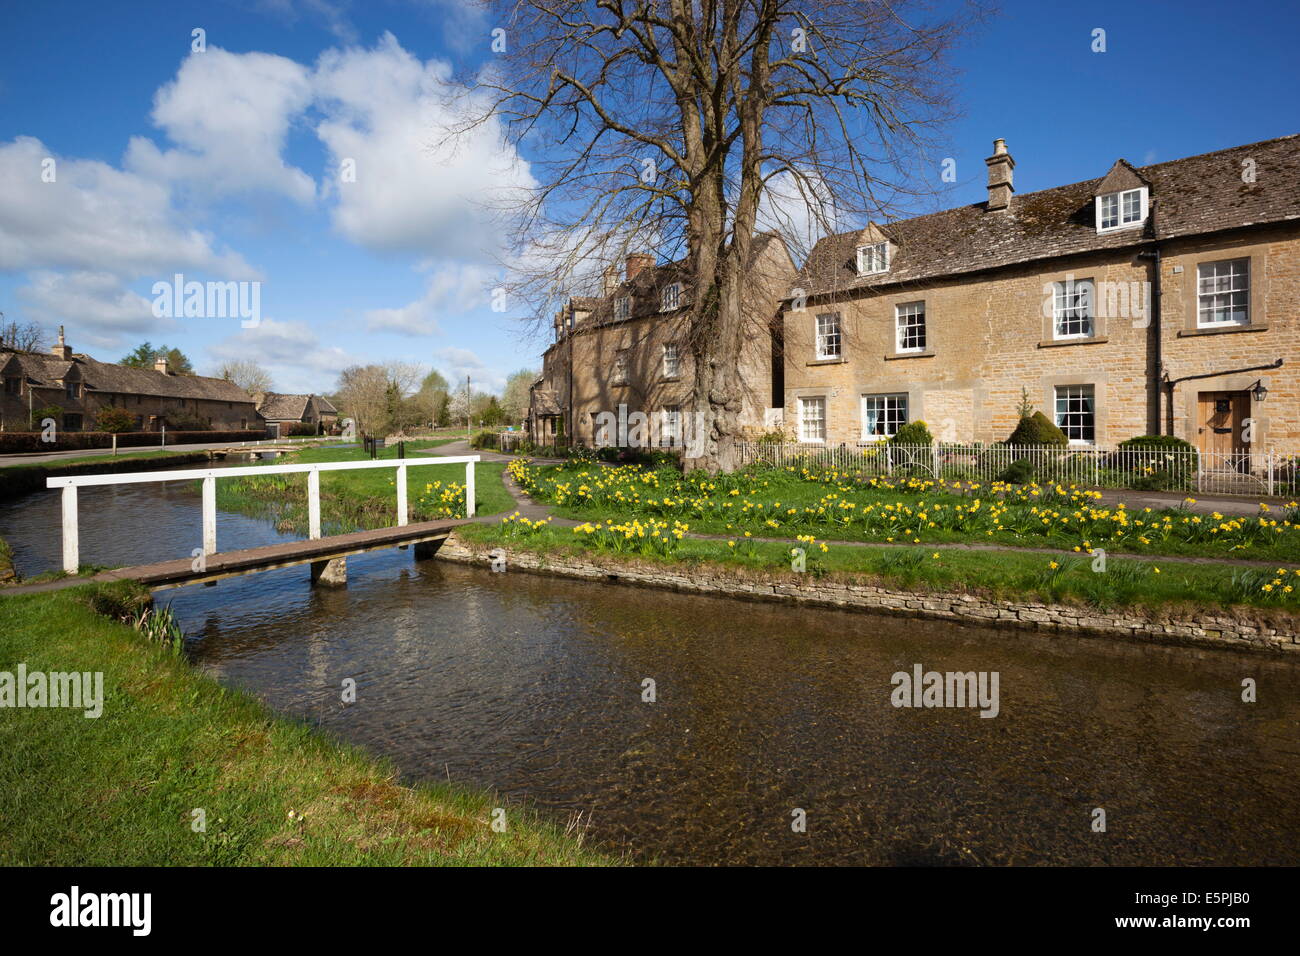 Cotswold cottages by the River Eye, Lower Slaughter, Cotswolds, Gloucestershire, Angleterre, Royaume-Uni, Europe Banque D'Images